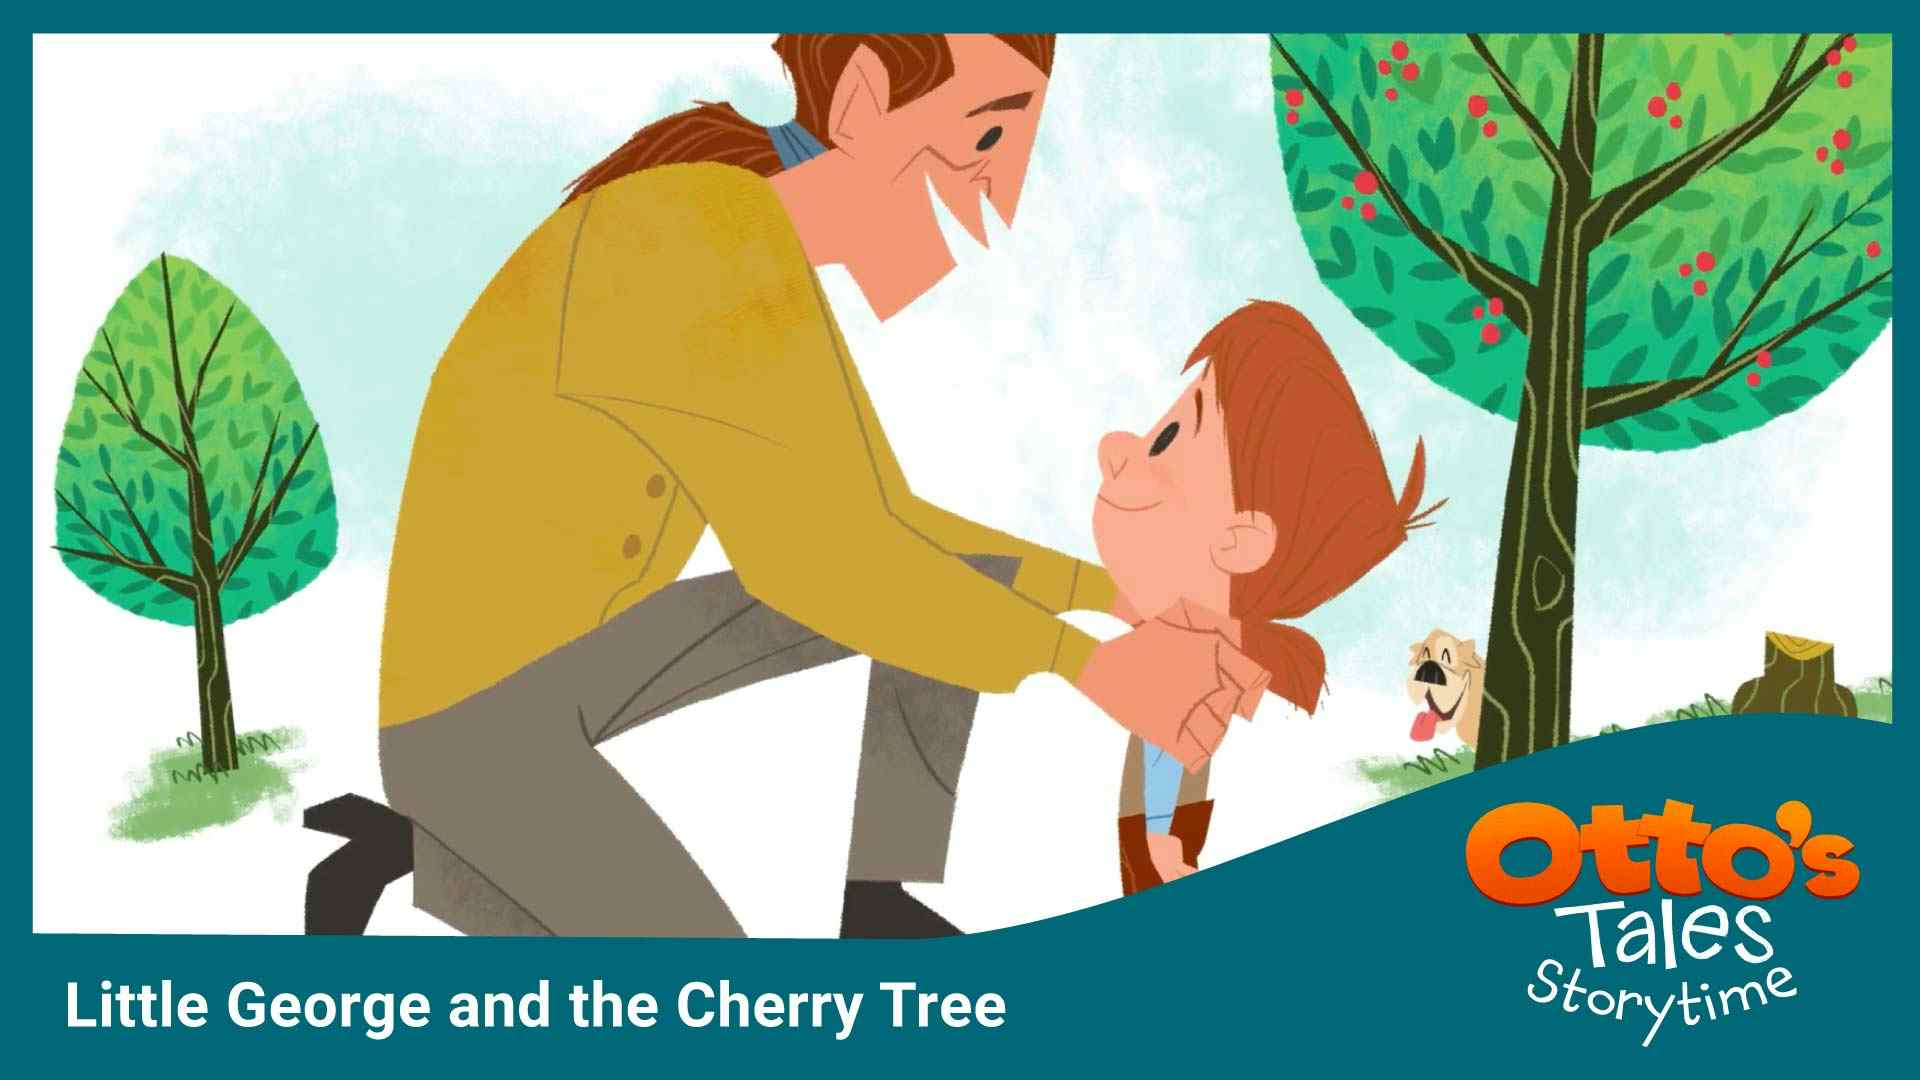 Little George and the Cherry Tree